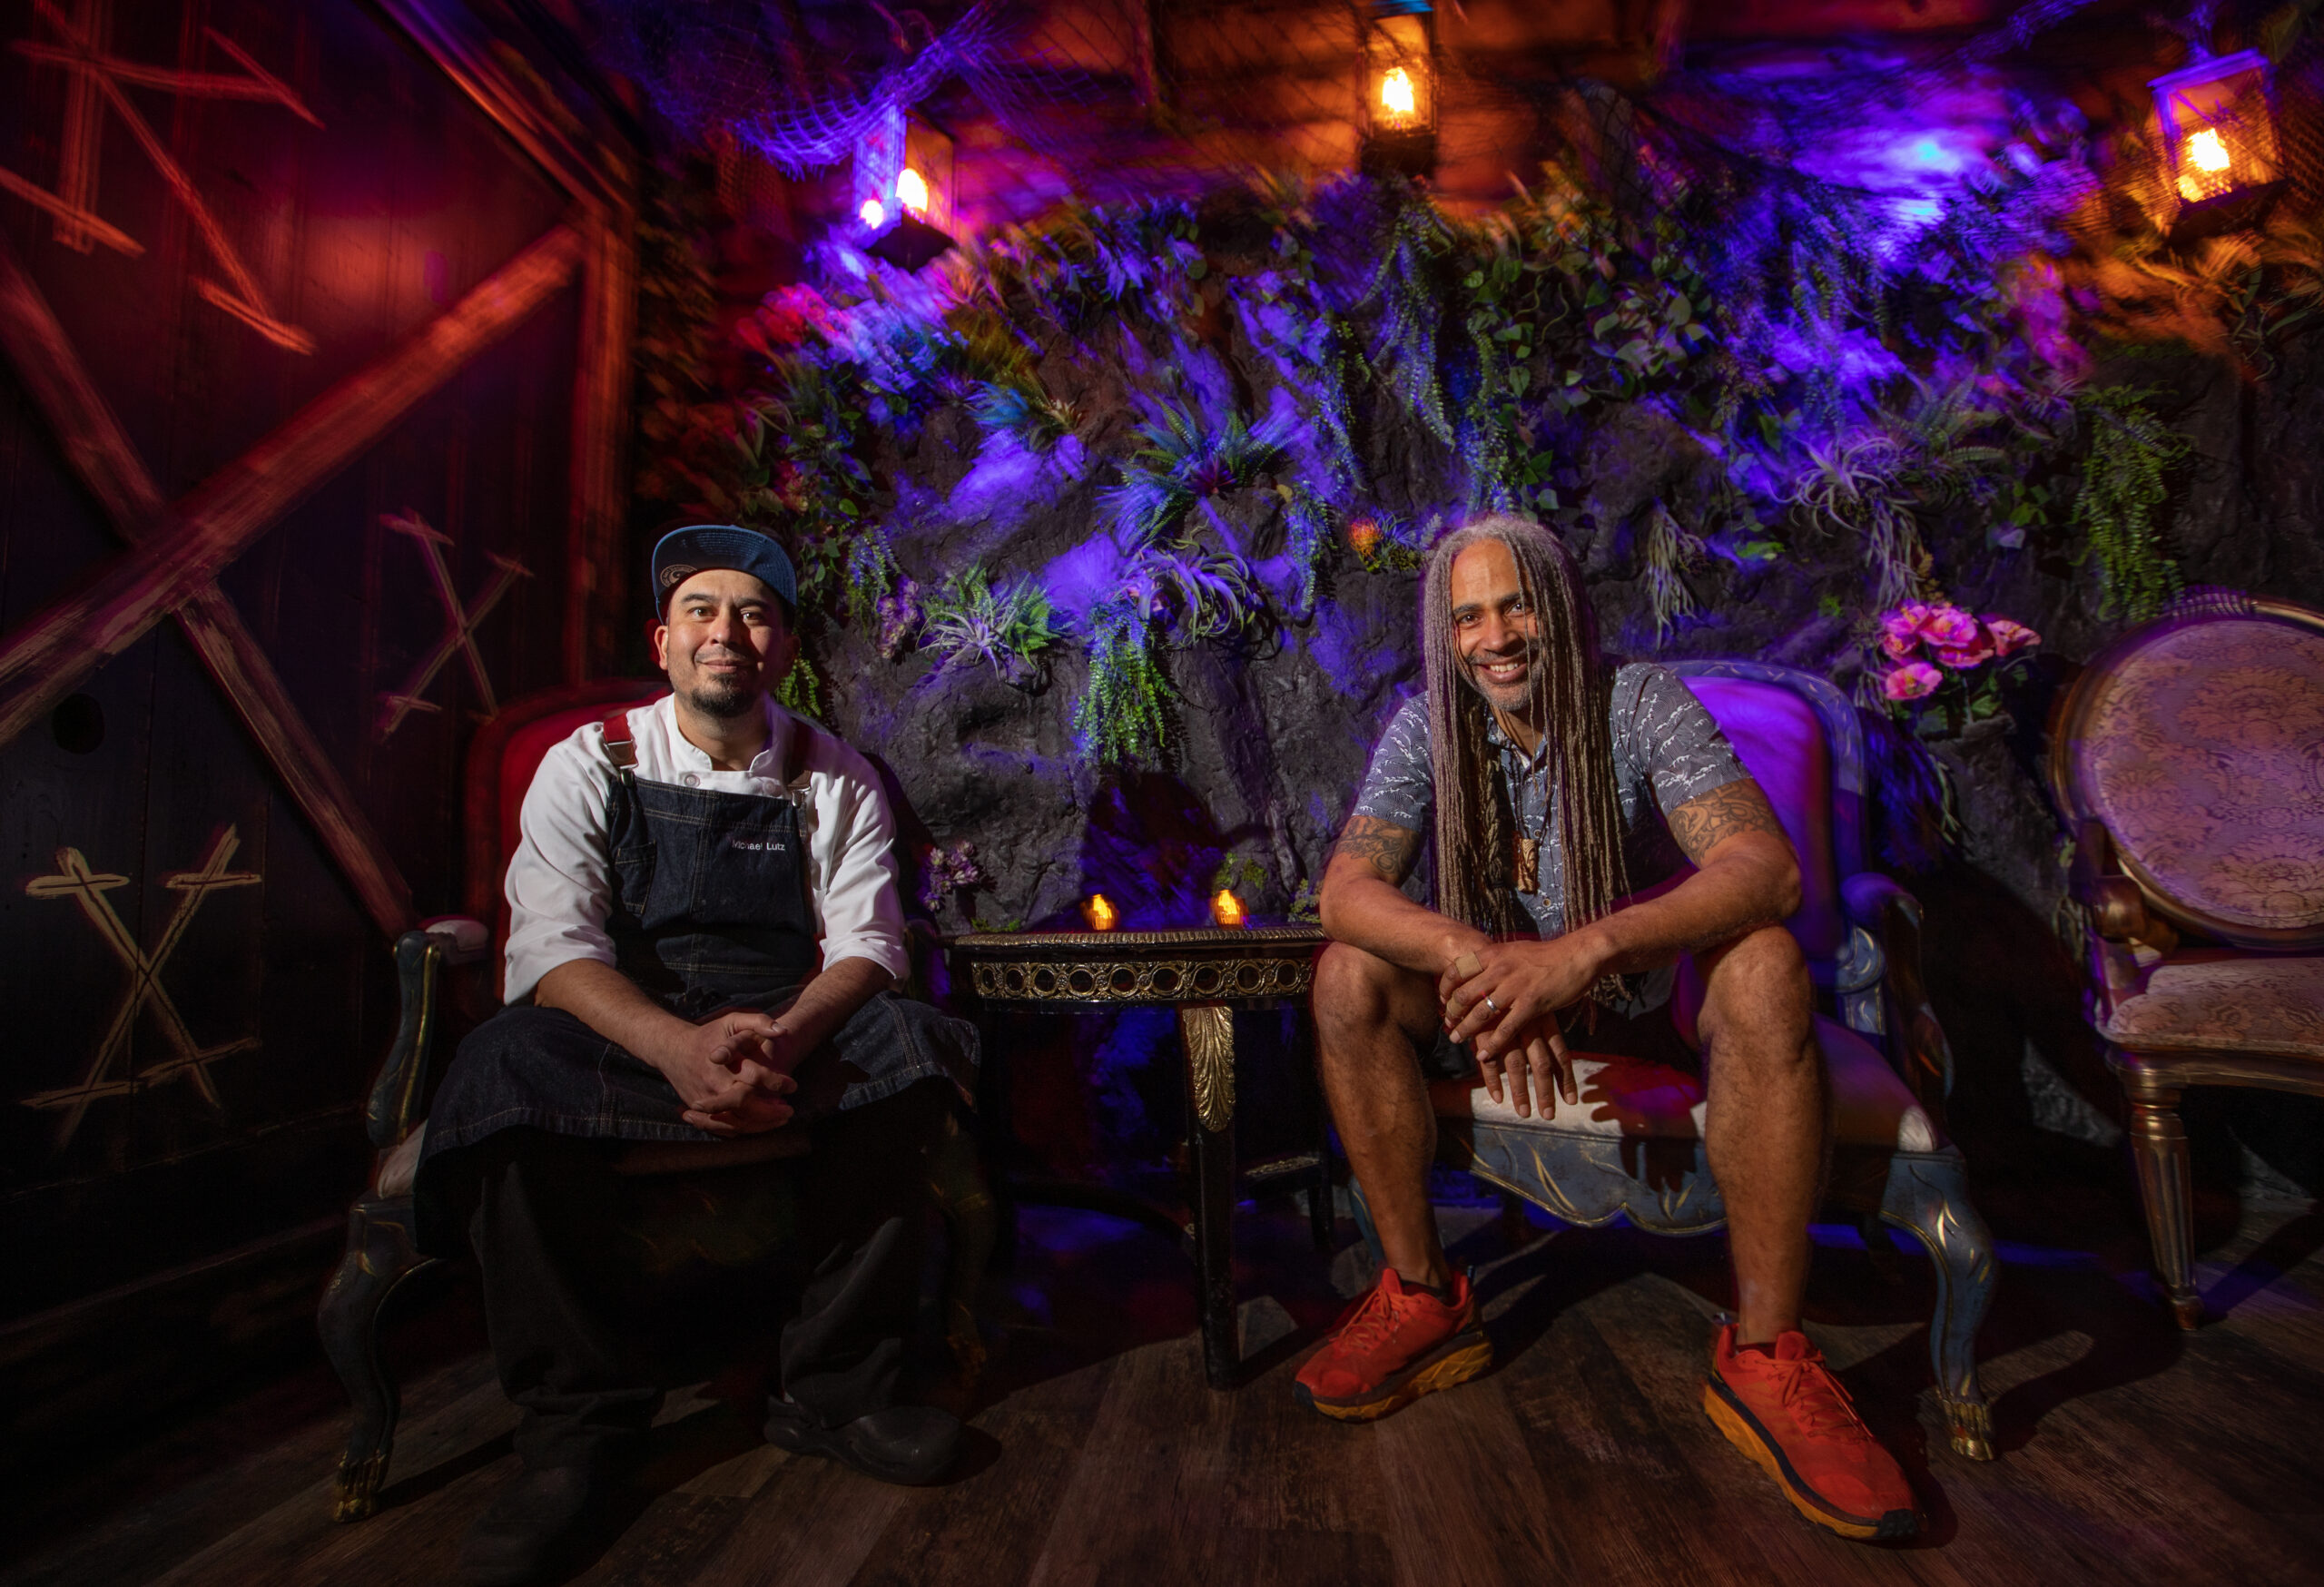 Chef Mike Lutz and owner Michael Richardson of Kapu Bar, in the captains room at the tiki bar and restaurant in the heart of downtown Petaluma on Keller street February 1, 2023 (Chad Surmick / The Press Democrat)